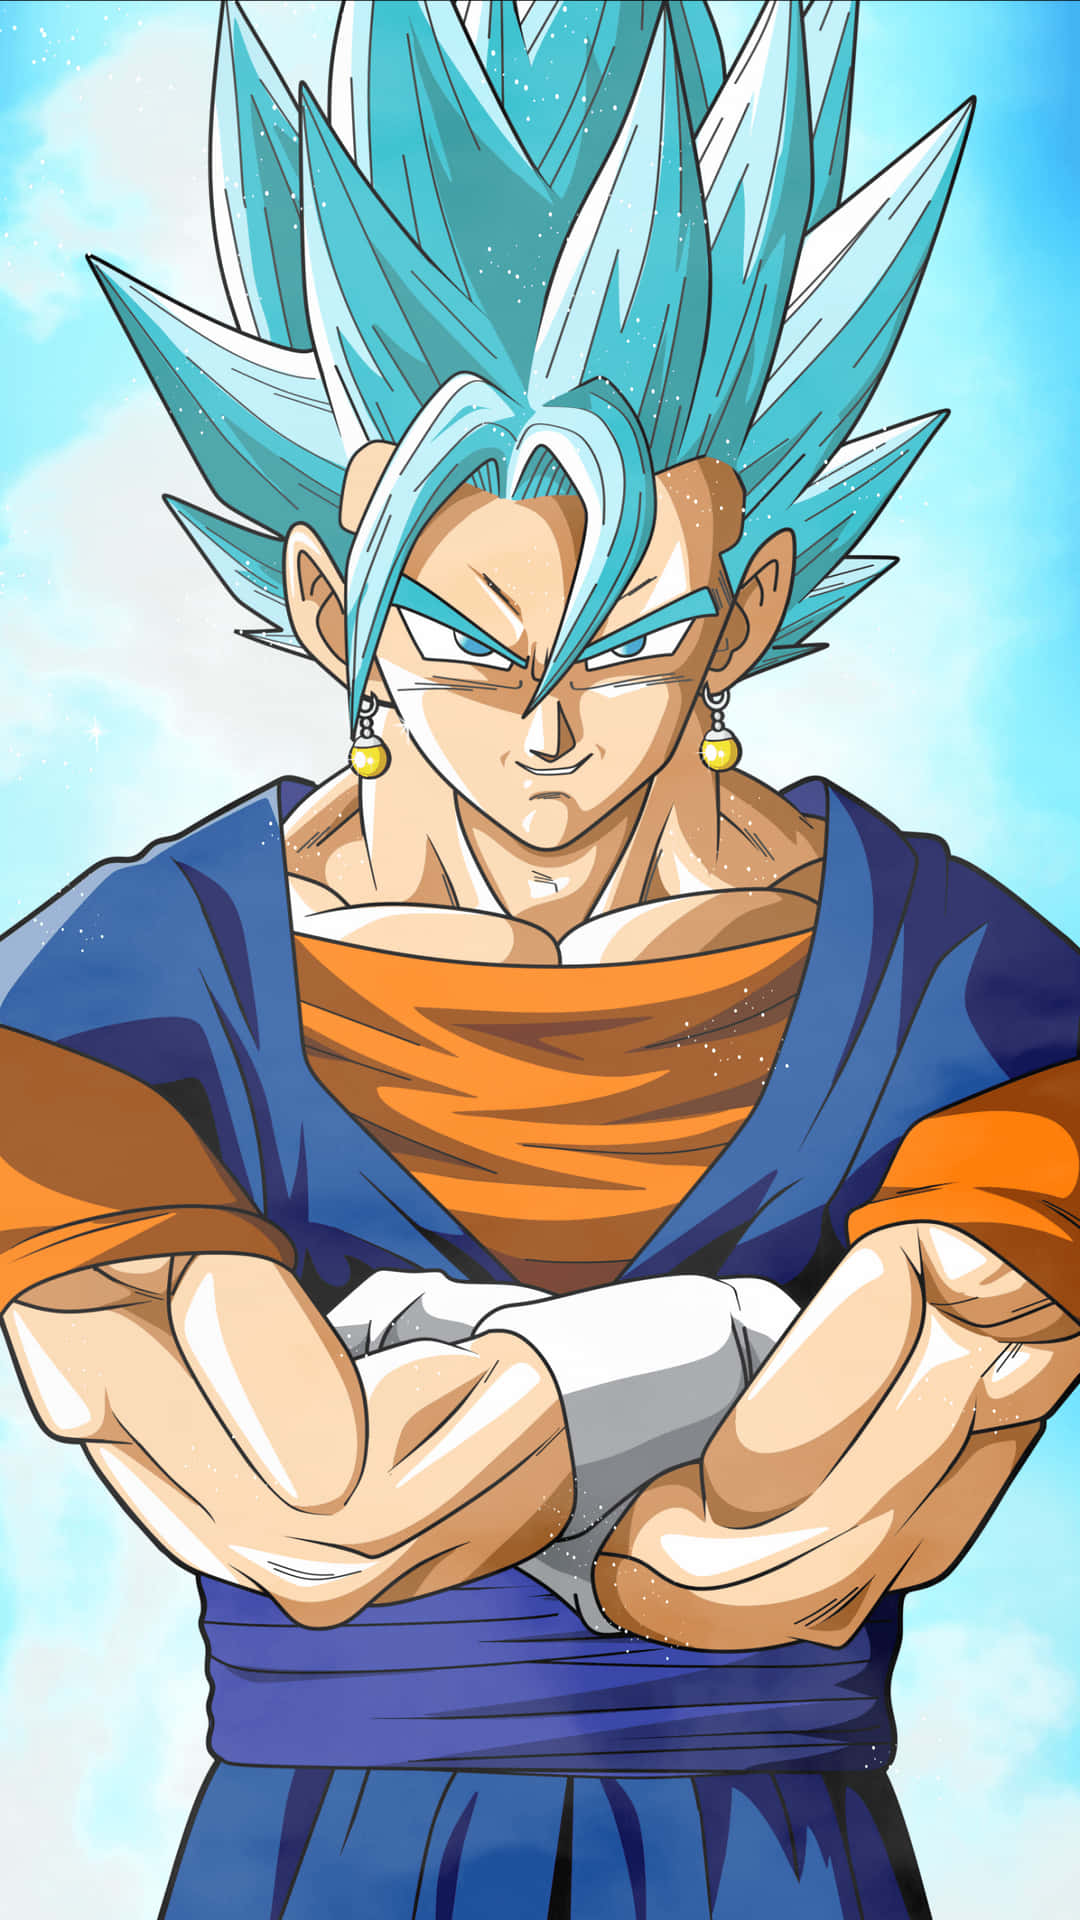 Unlock the Power of your Smartphone with the Official Dragon Ball Super iPhone Wallpaper